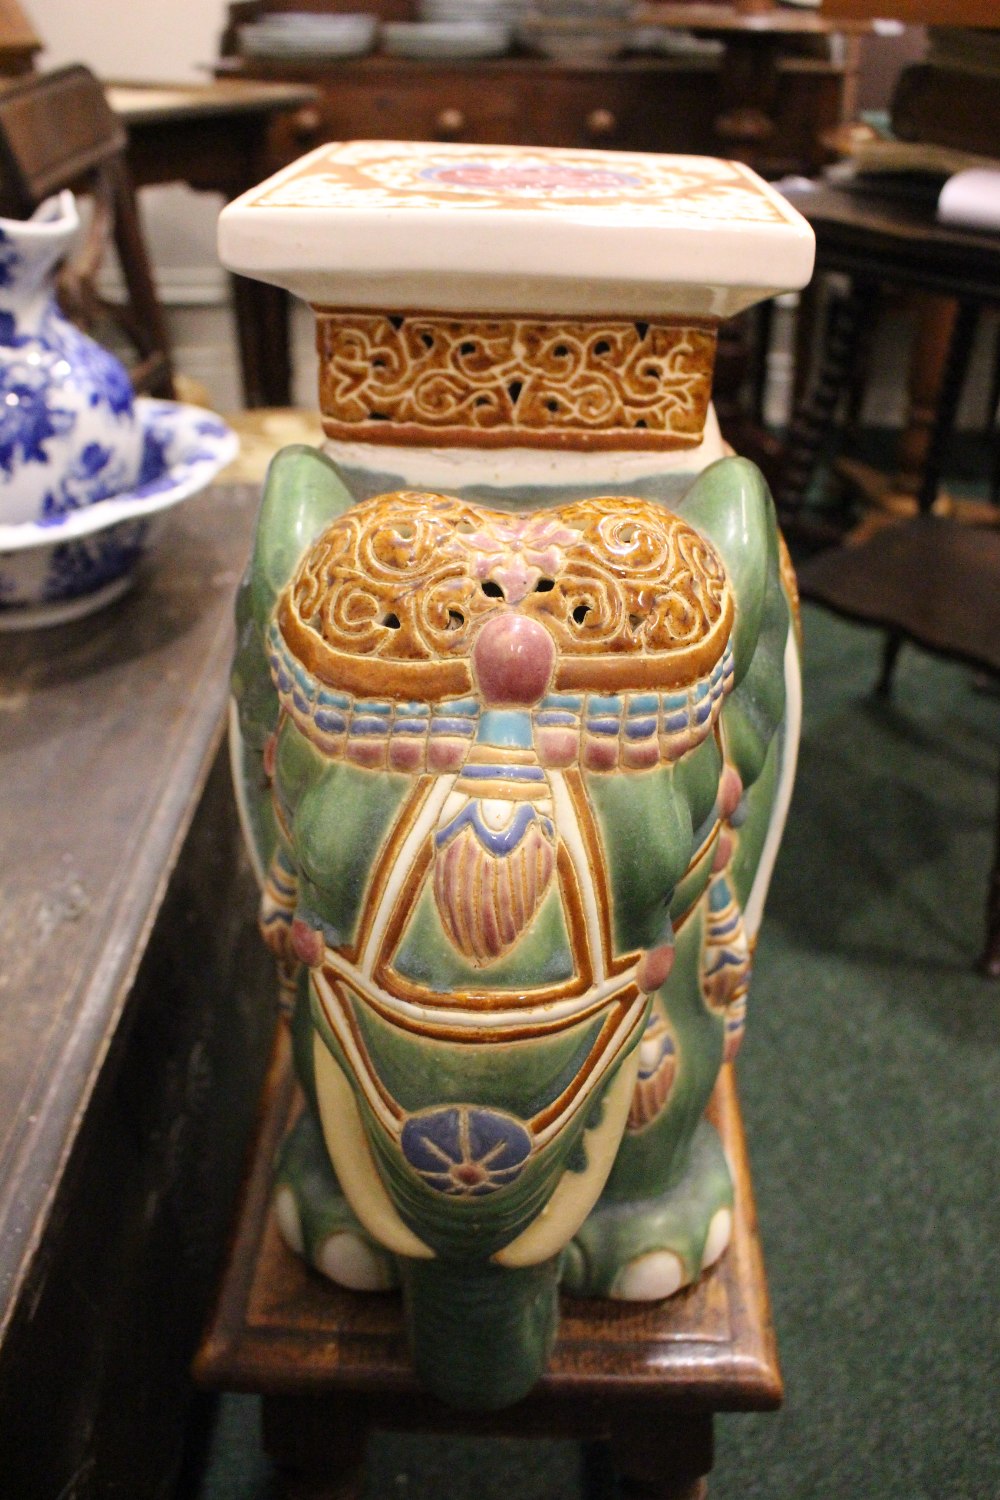 A CERAMIC JARDINERE / POT STAND IN THE FORM OF AN ELEPHANT, dressed in robes with a square seat as - Image 4 of 5